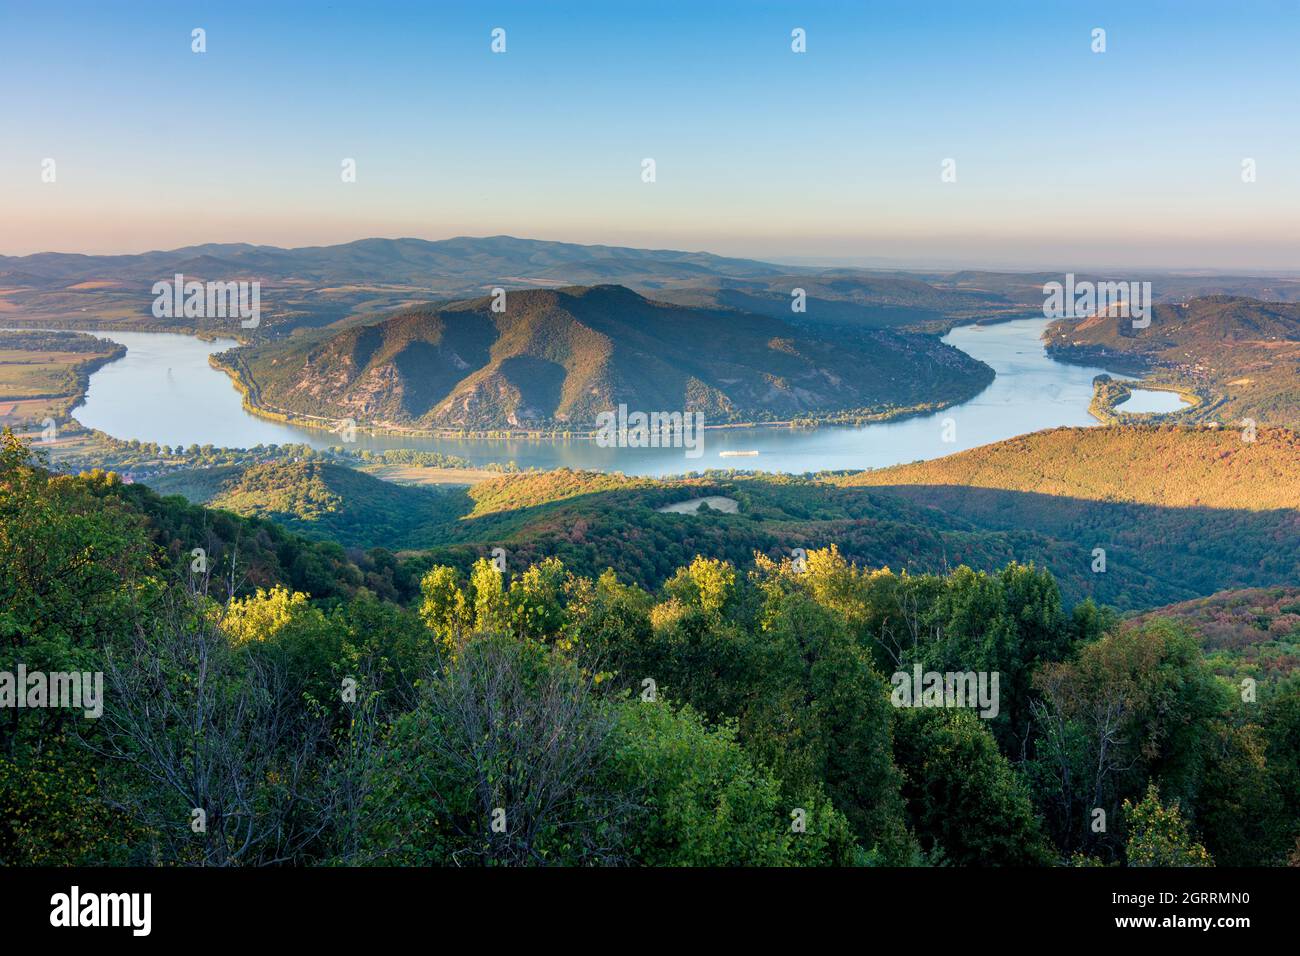 Visegrad Mountains: bend of Danube River, view to Börzsöny Mountains, view from summit Predikaloszek (Predigerstuhl, Preaching chair) in Danube-Ipoly Stock Photo